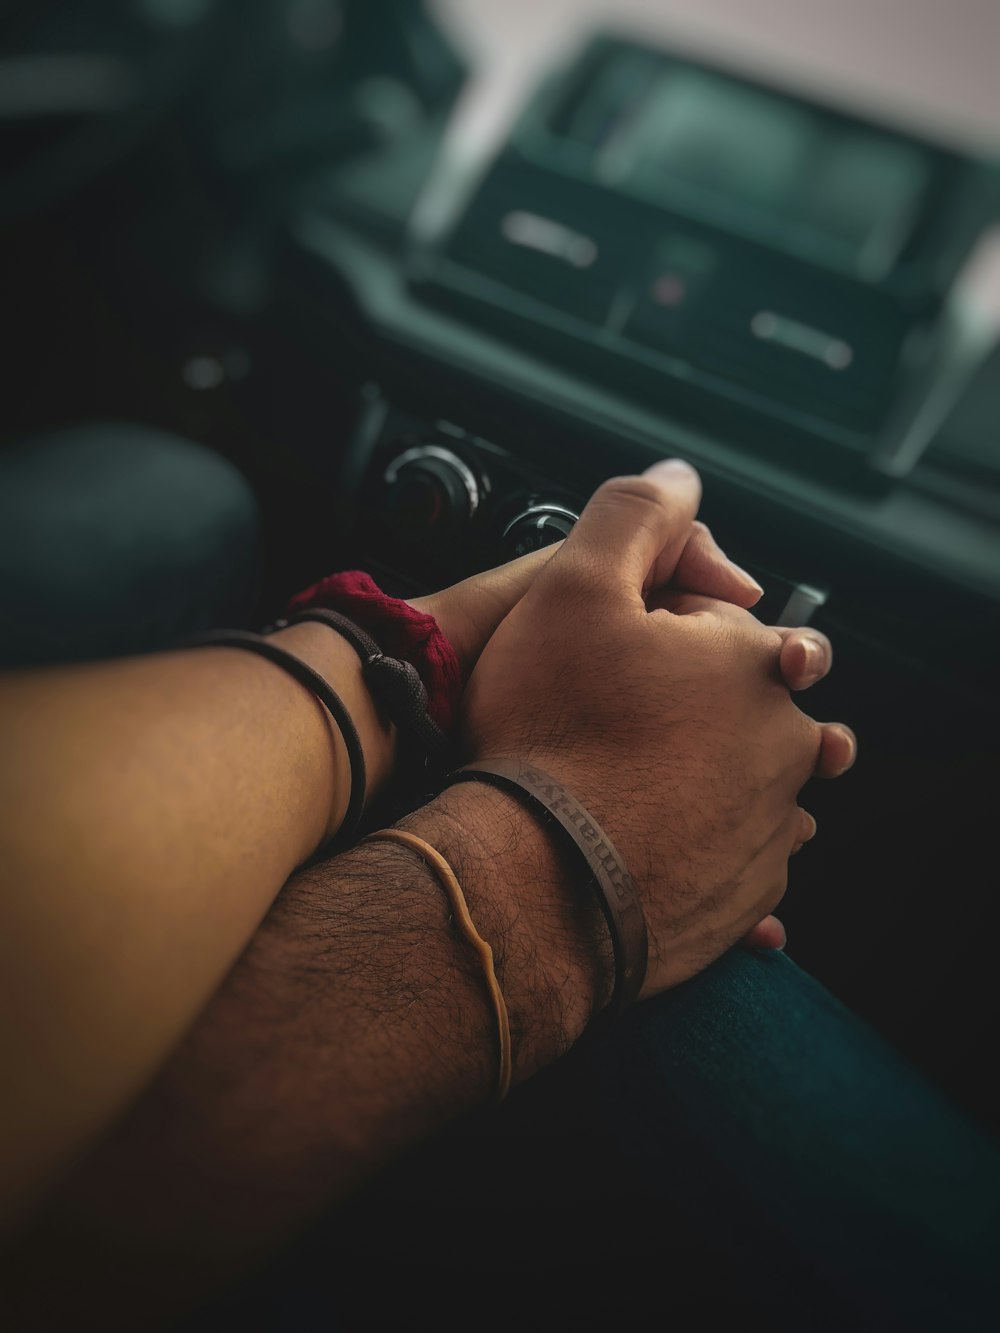 500+ Holding Hand Pictures | Download Free Images on Unsplash